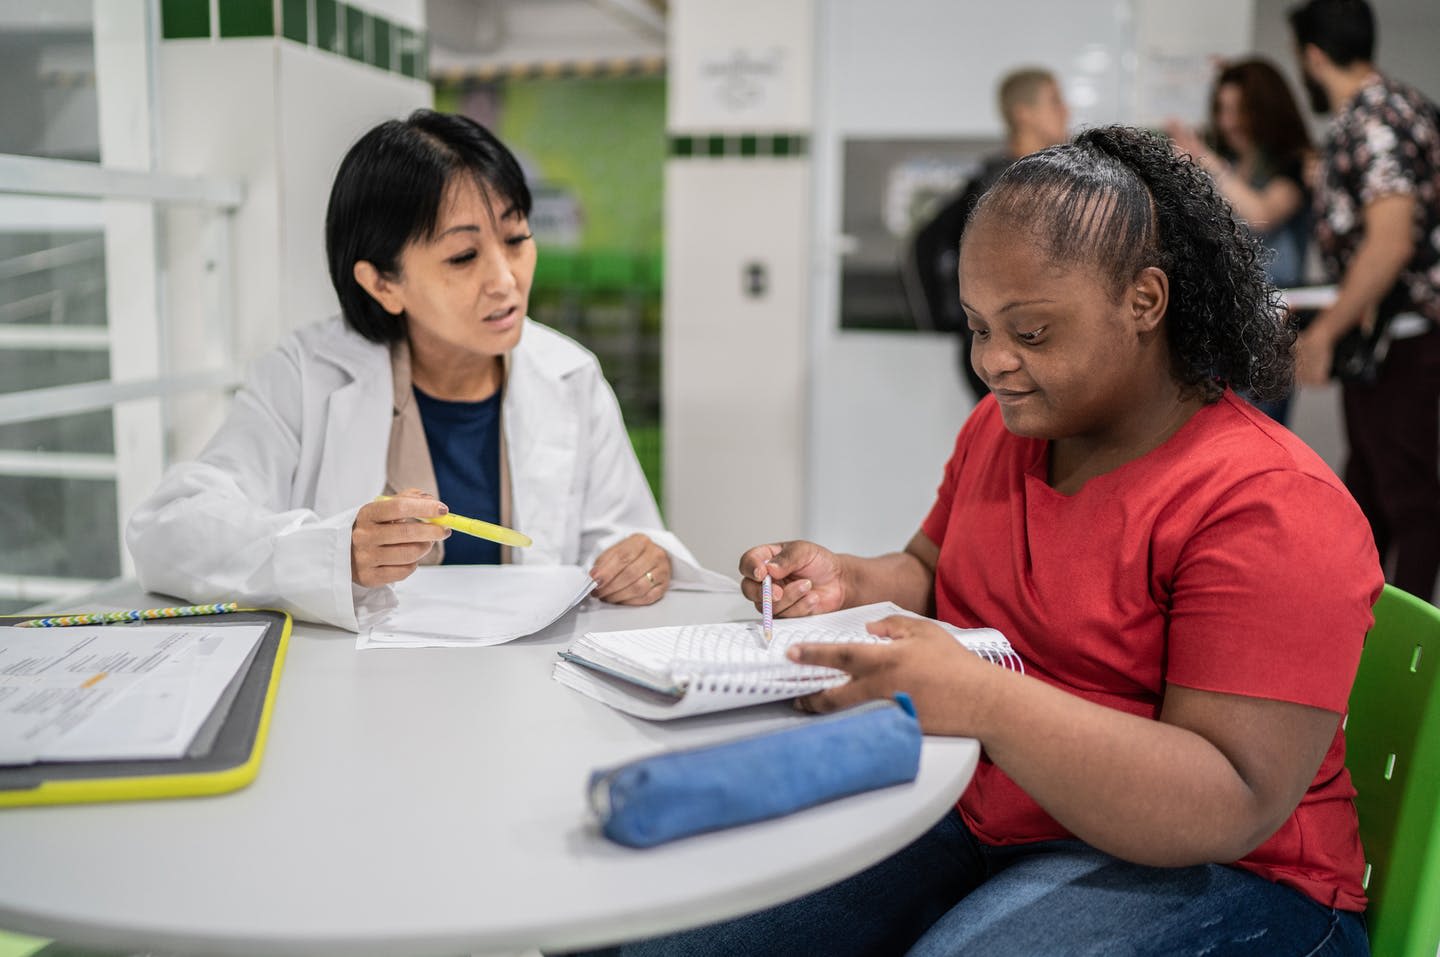 Students of color in special education are less likely to get the help they need – here are 3 ways teachers can do better